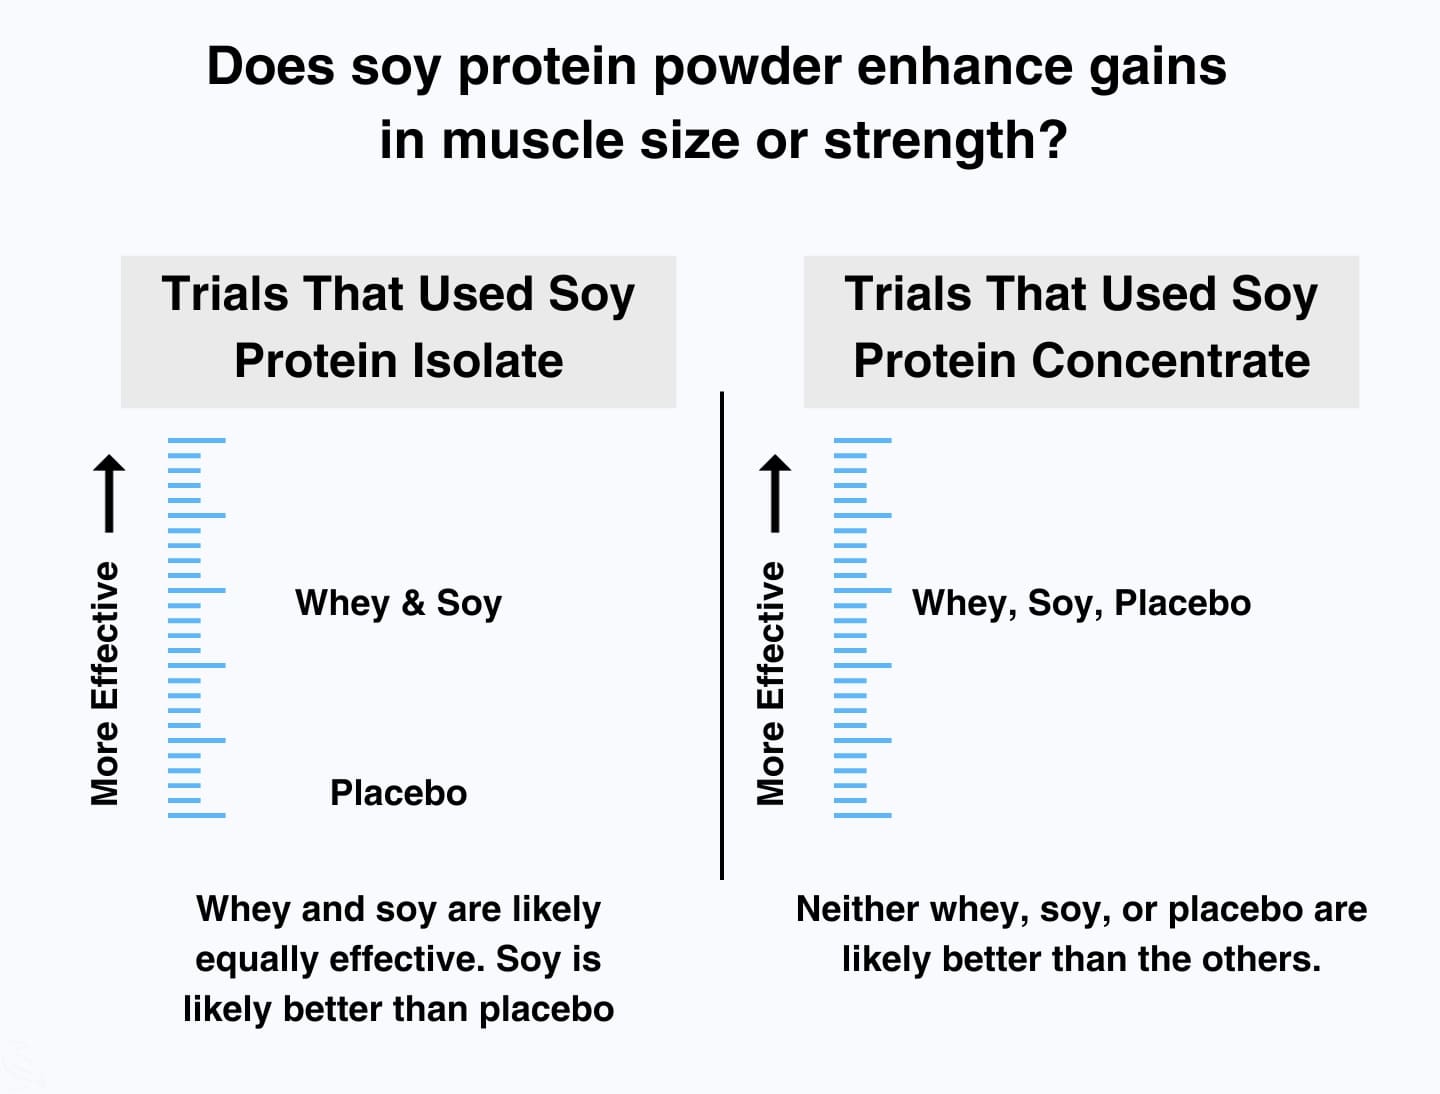 This image shows that the use of soy protein when bodybuilding, weighlifting, or another engaging in another resistance exercise is unlikely to be more effective than placebo or whey for soy protein isolate and soy protein concentrate.